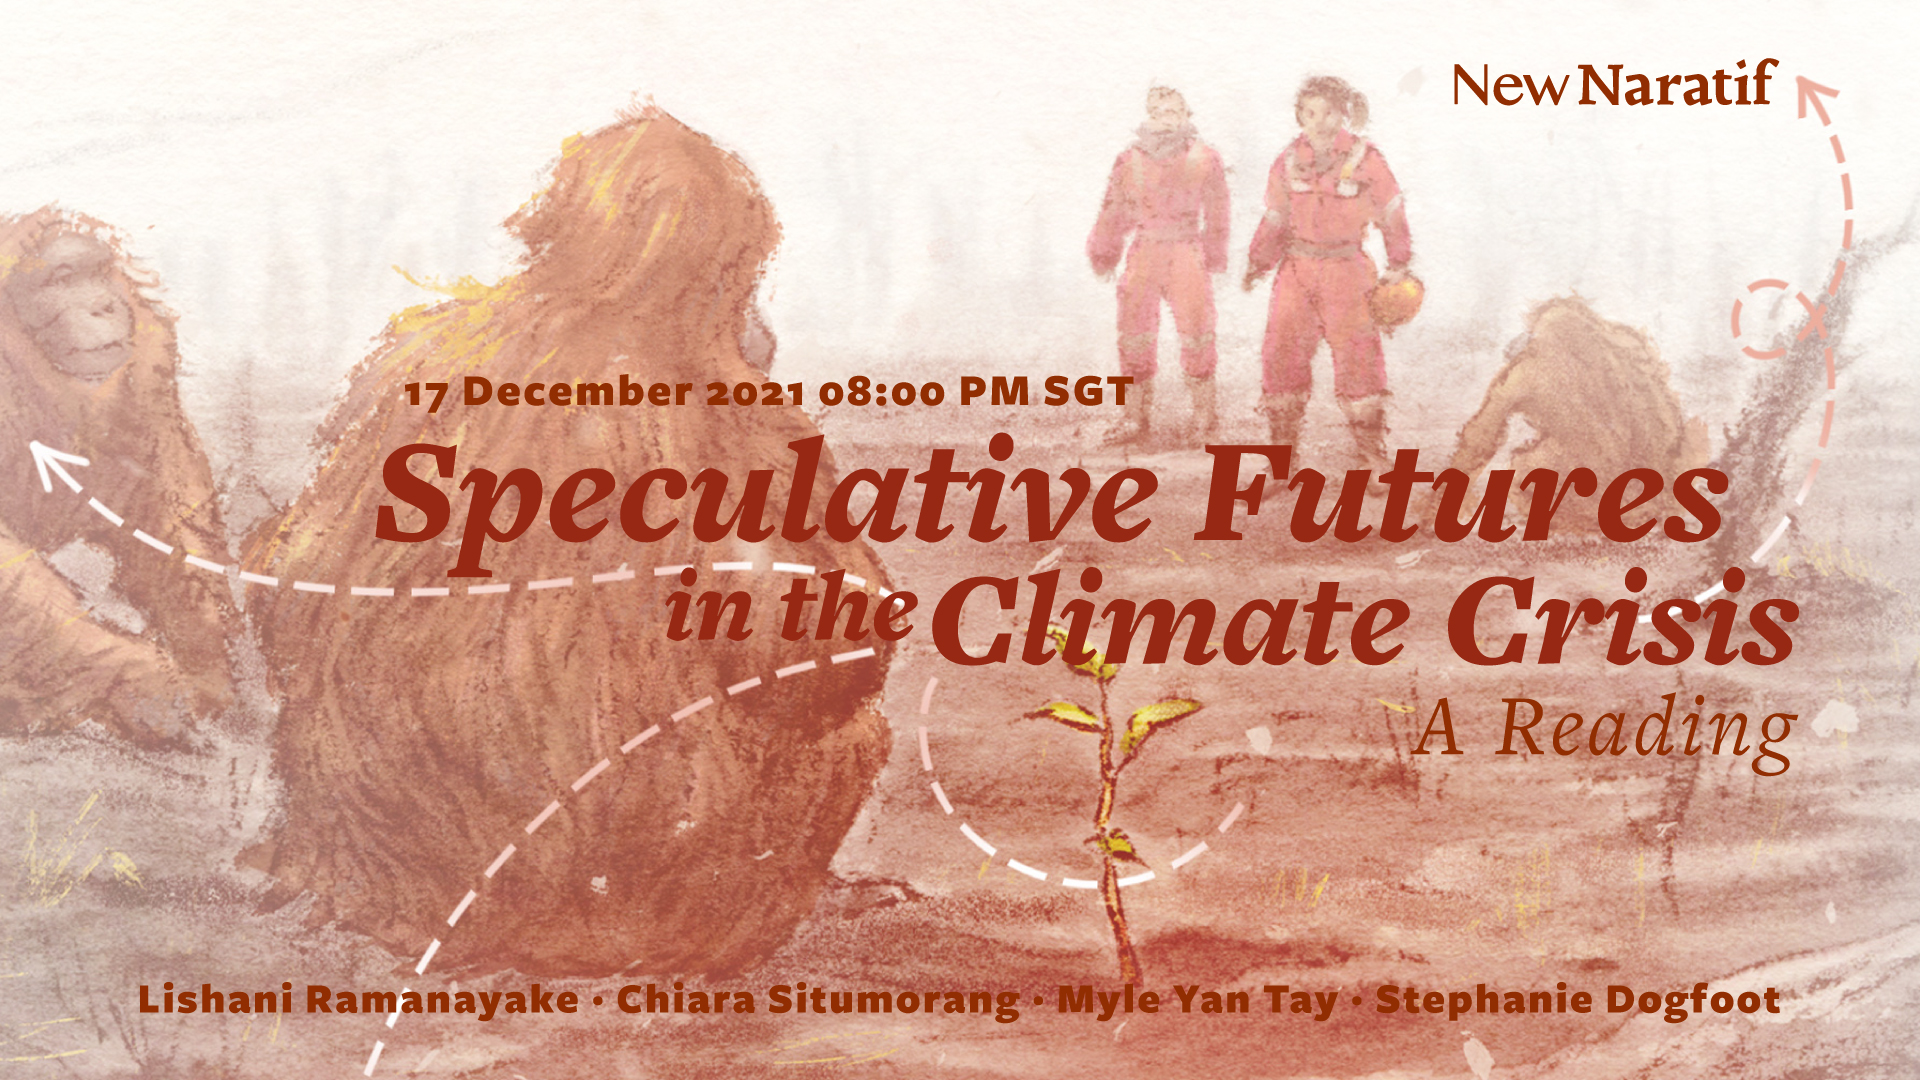 17 December 2021 8:00 PM SGT. Speculative Futures in the Climate Crisis: A Reading. Lishani Ramanayake. Chiara Situmorang. Myle Yan Tay. Stephanie Dogfoot.